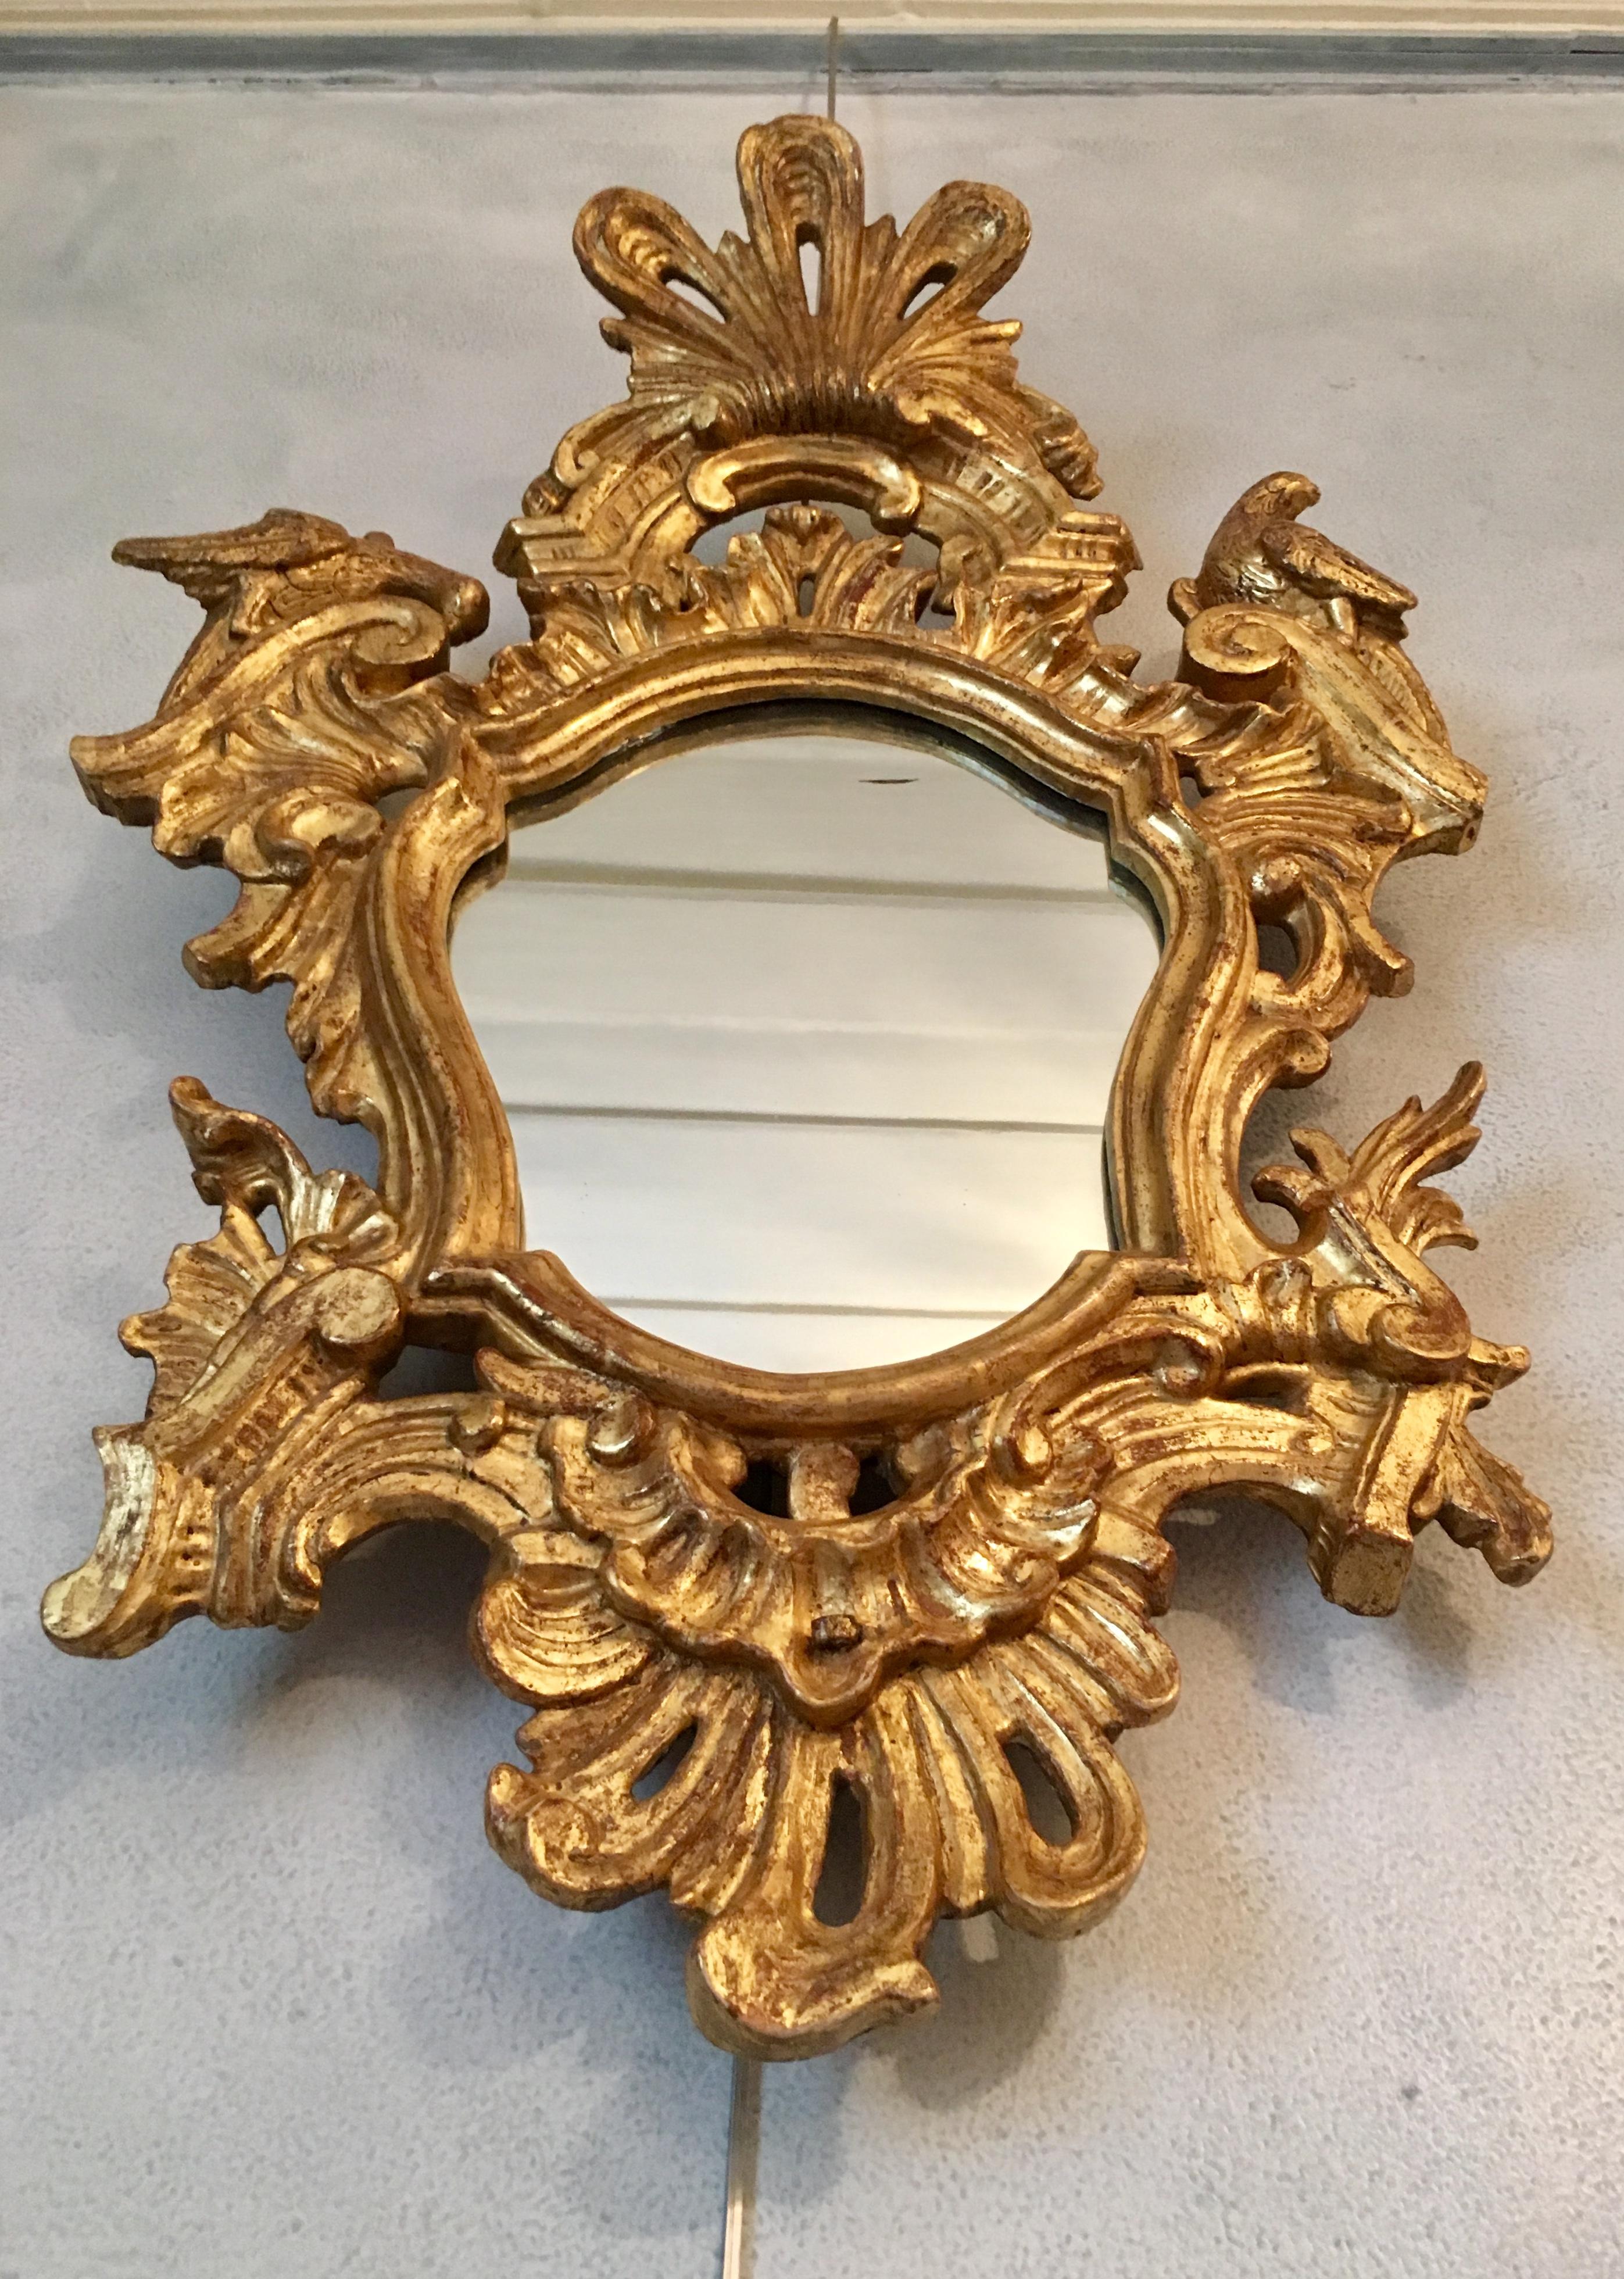 Giltwood Pair of Mirrors in Carved and Guilt Wood, Spanish, 18th Century For Sale